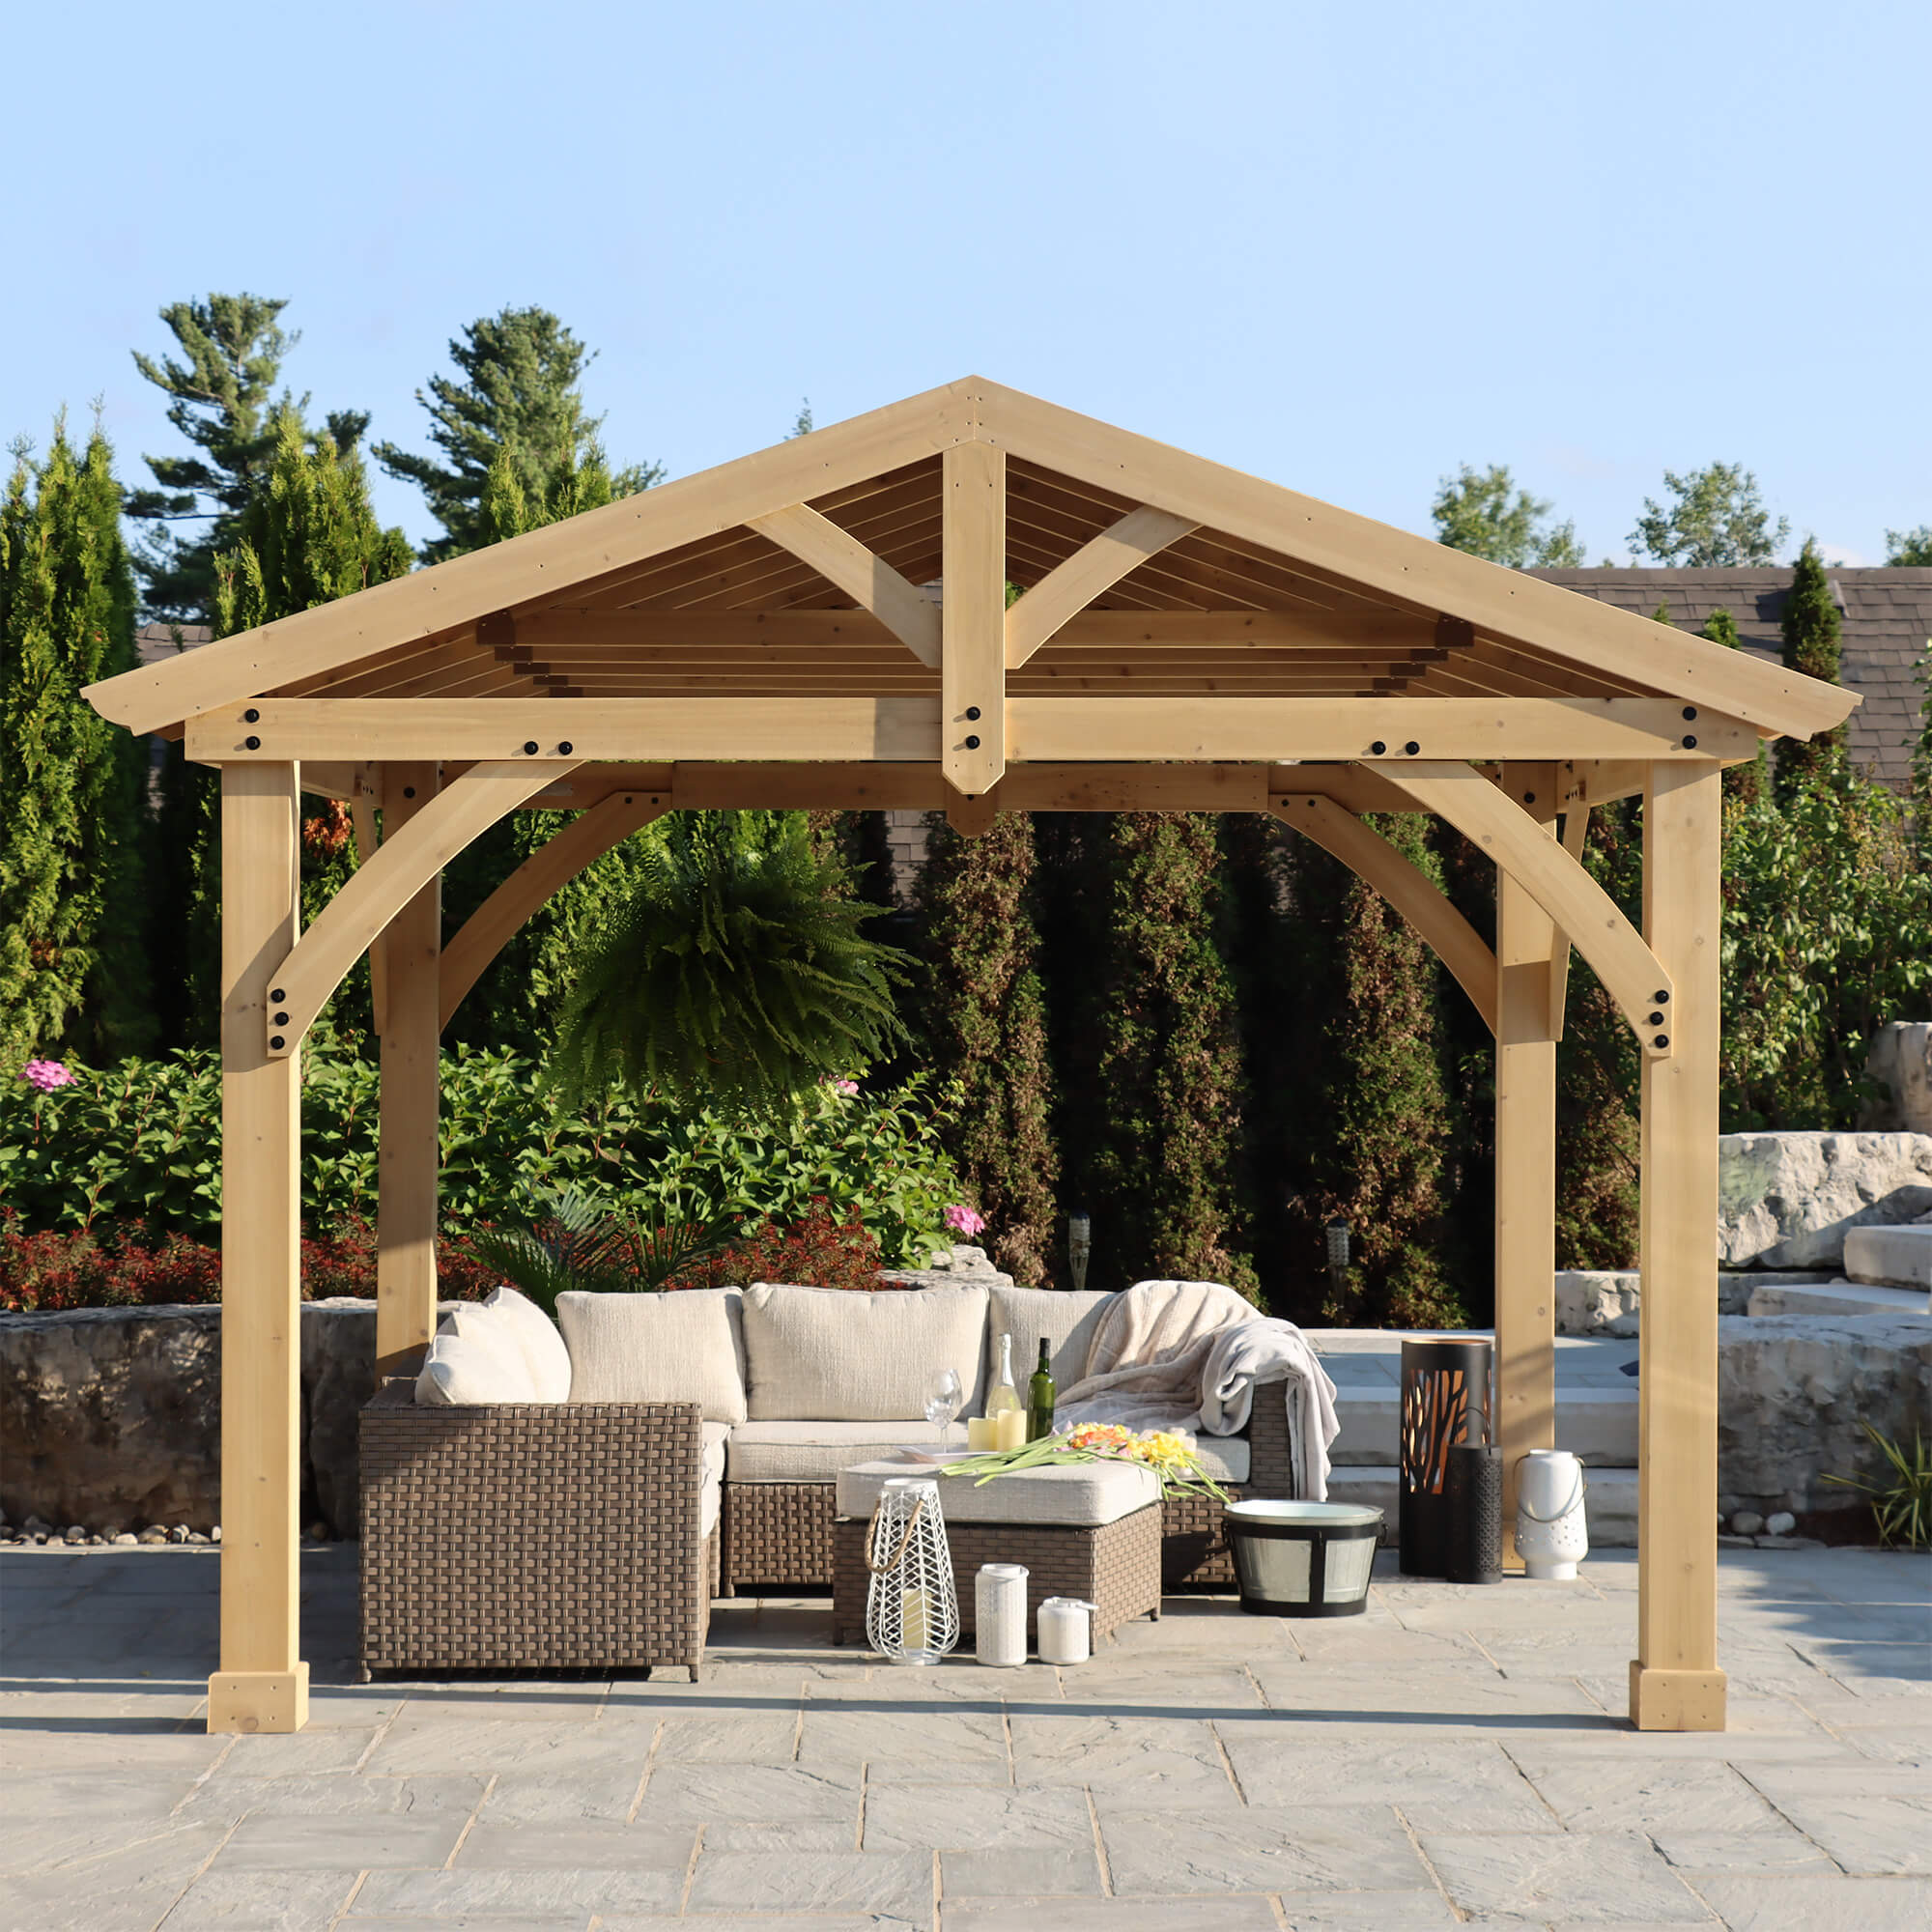 Elegant outdoor seating area enhanced by the Yardistry Carolina Cedar Pavilion, featuring an 11 x 13 aluminum roof, set within a lush garden.